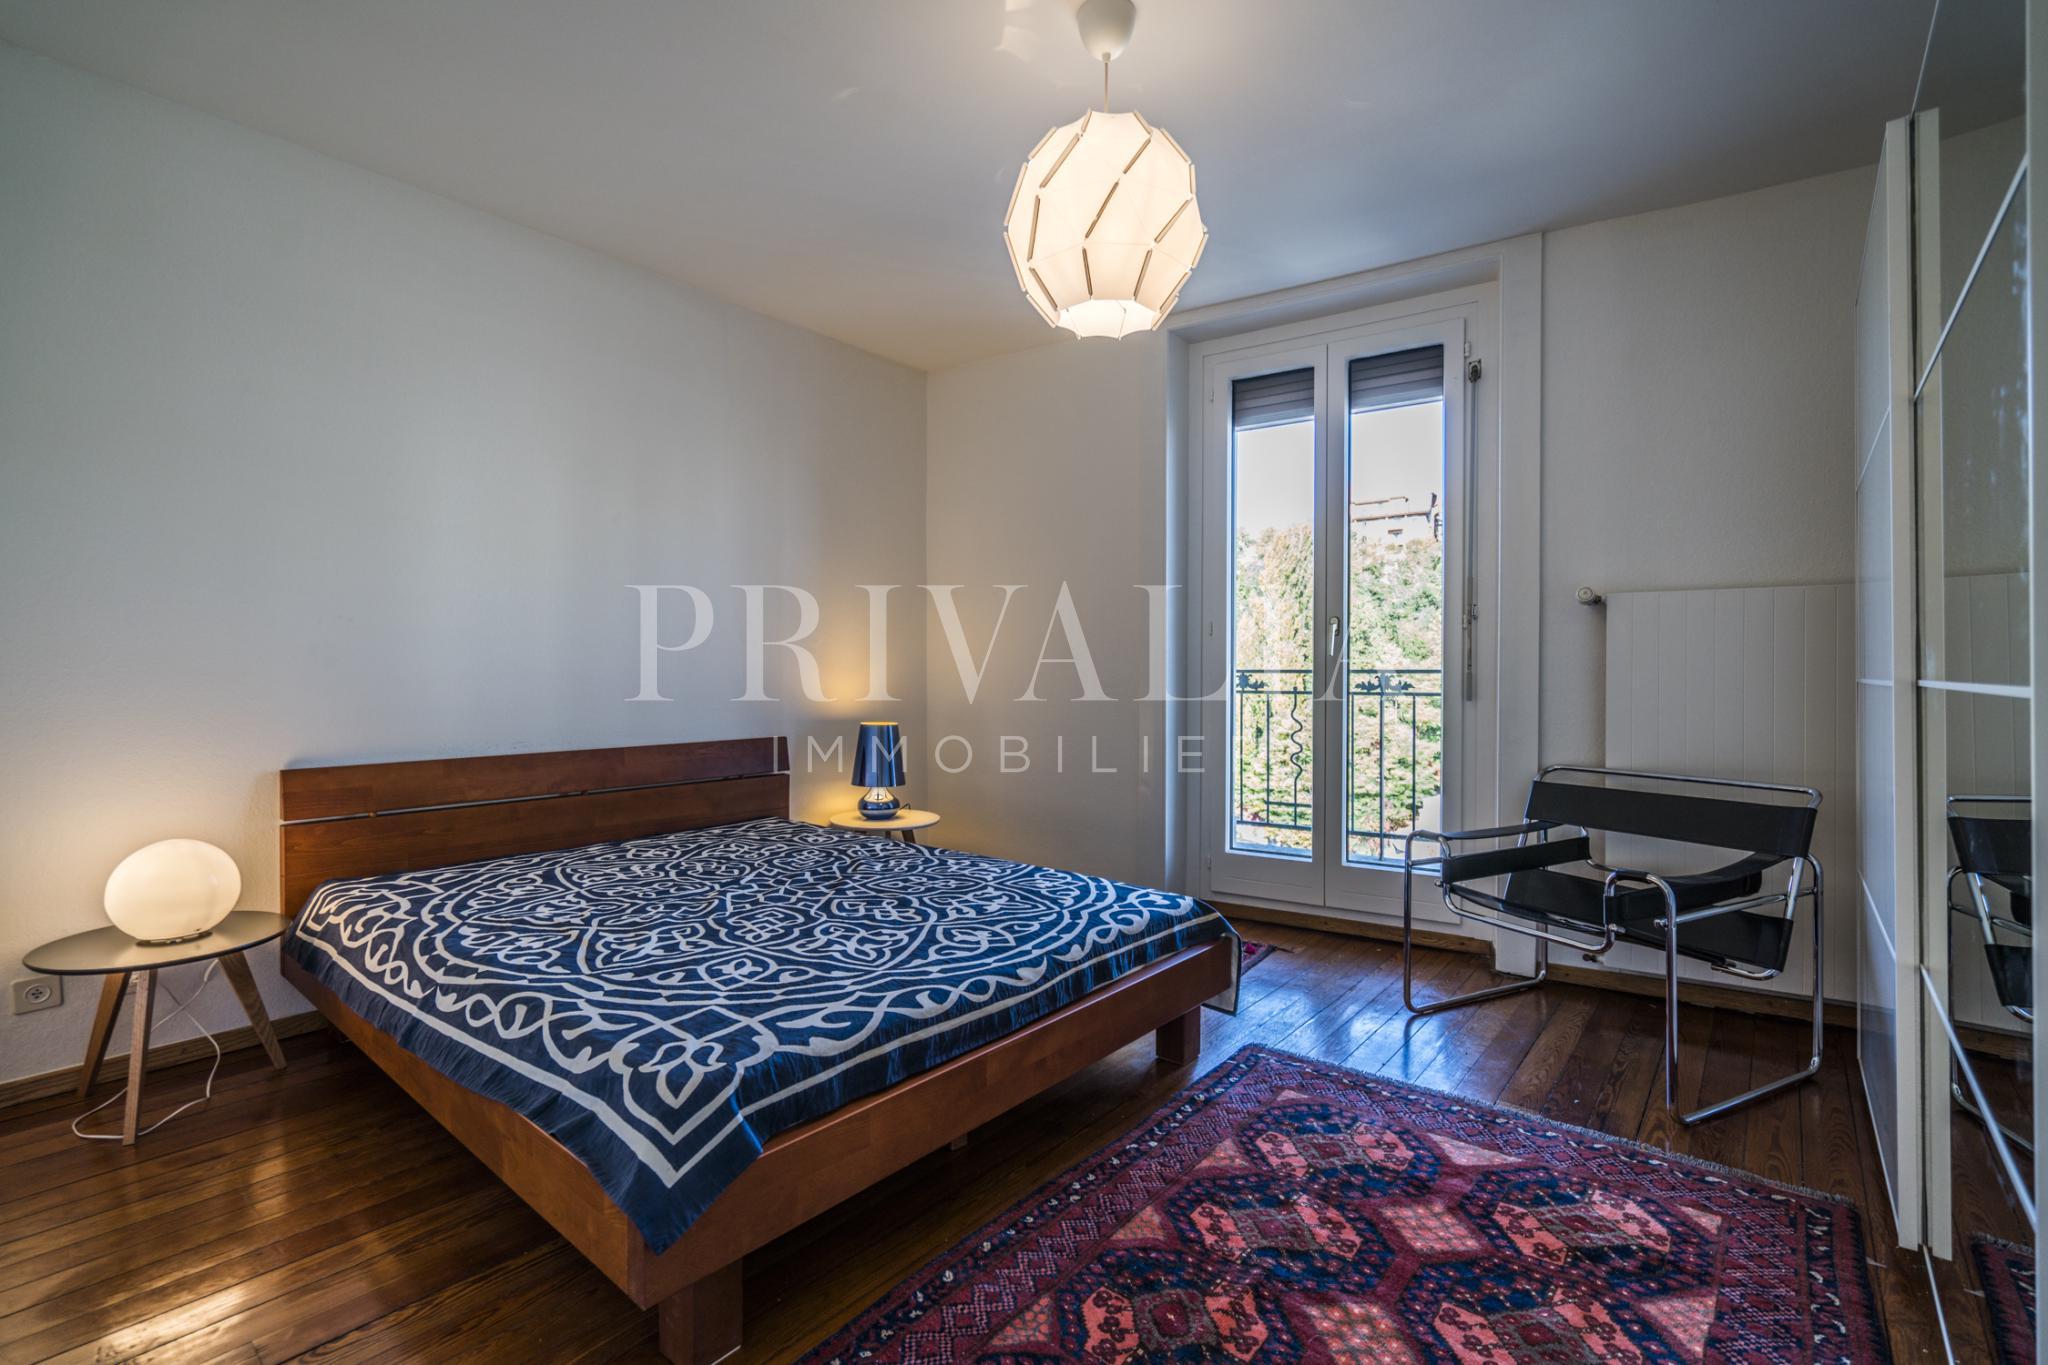 PrivaliaBeautifully furnished apartment with superb view over the Rhône and the city